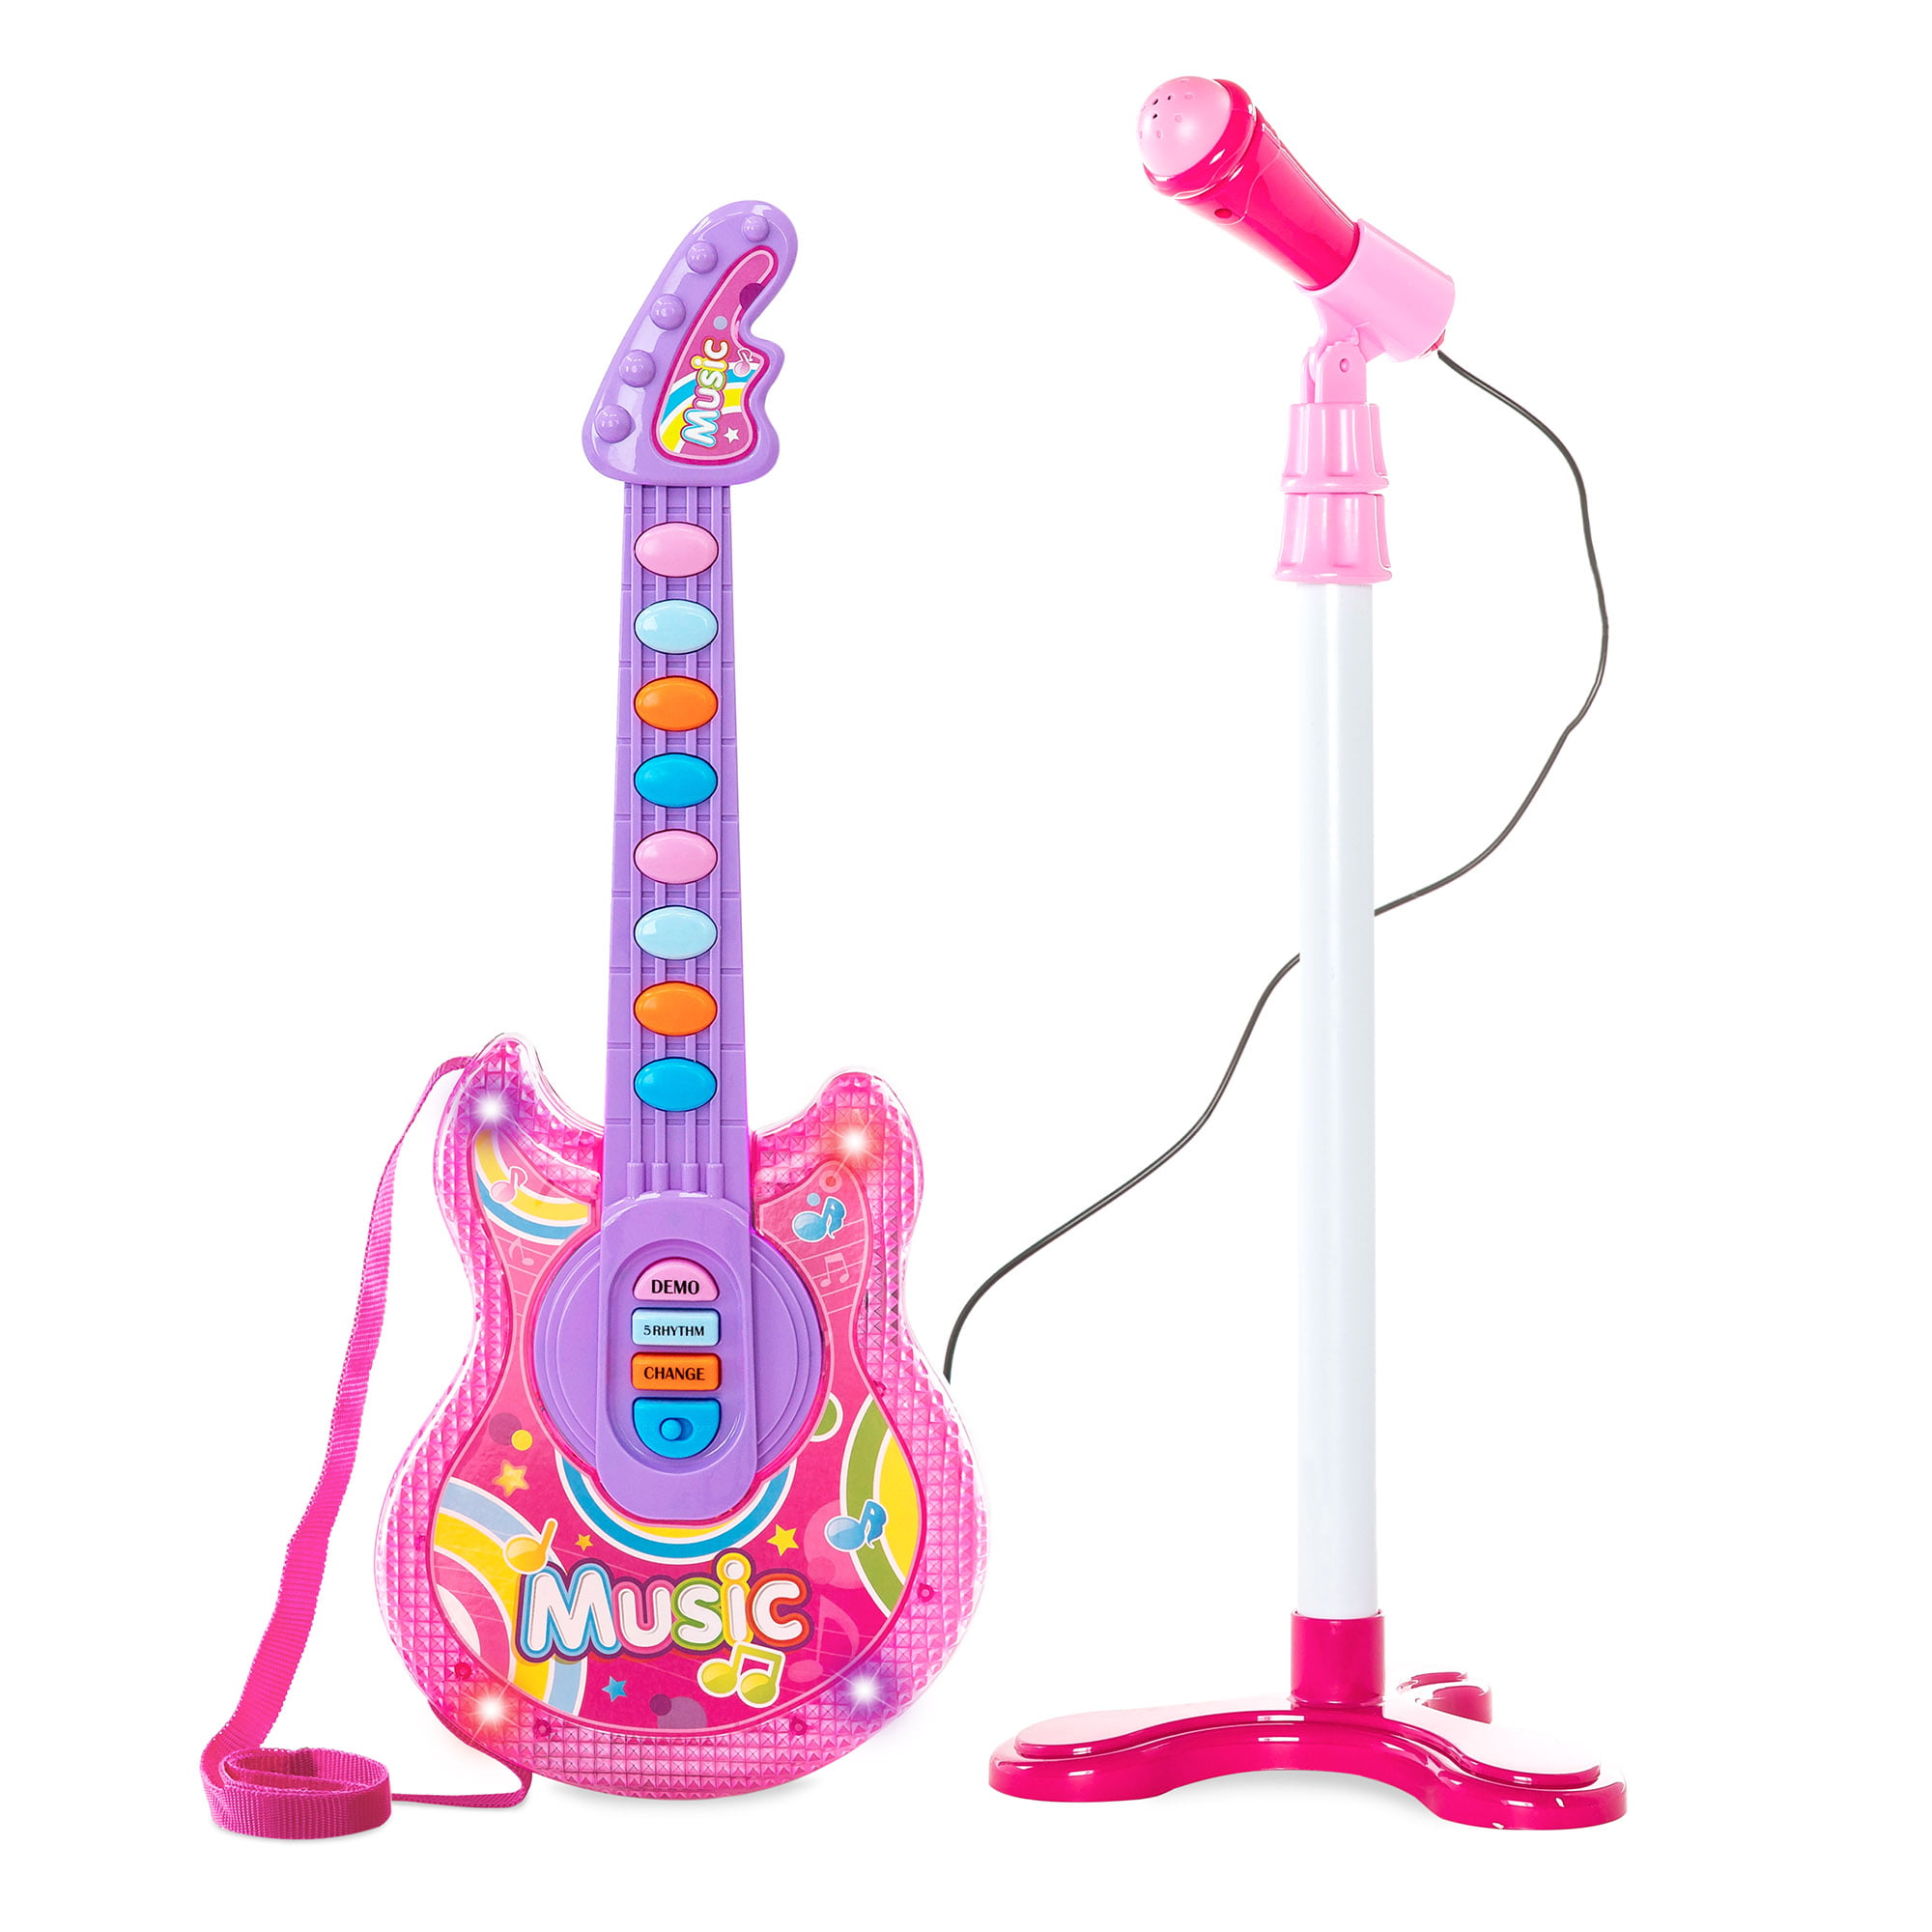 Kids children baby Musician Guitar Toys with Music and Light Battery Operated 